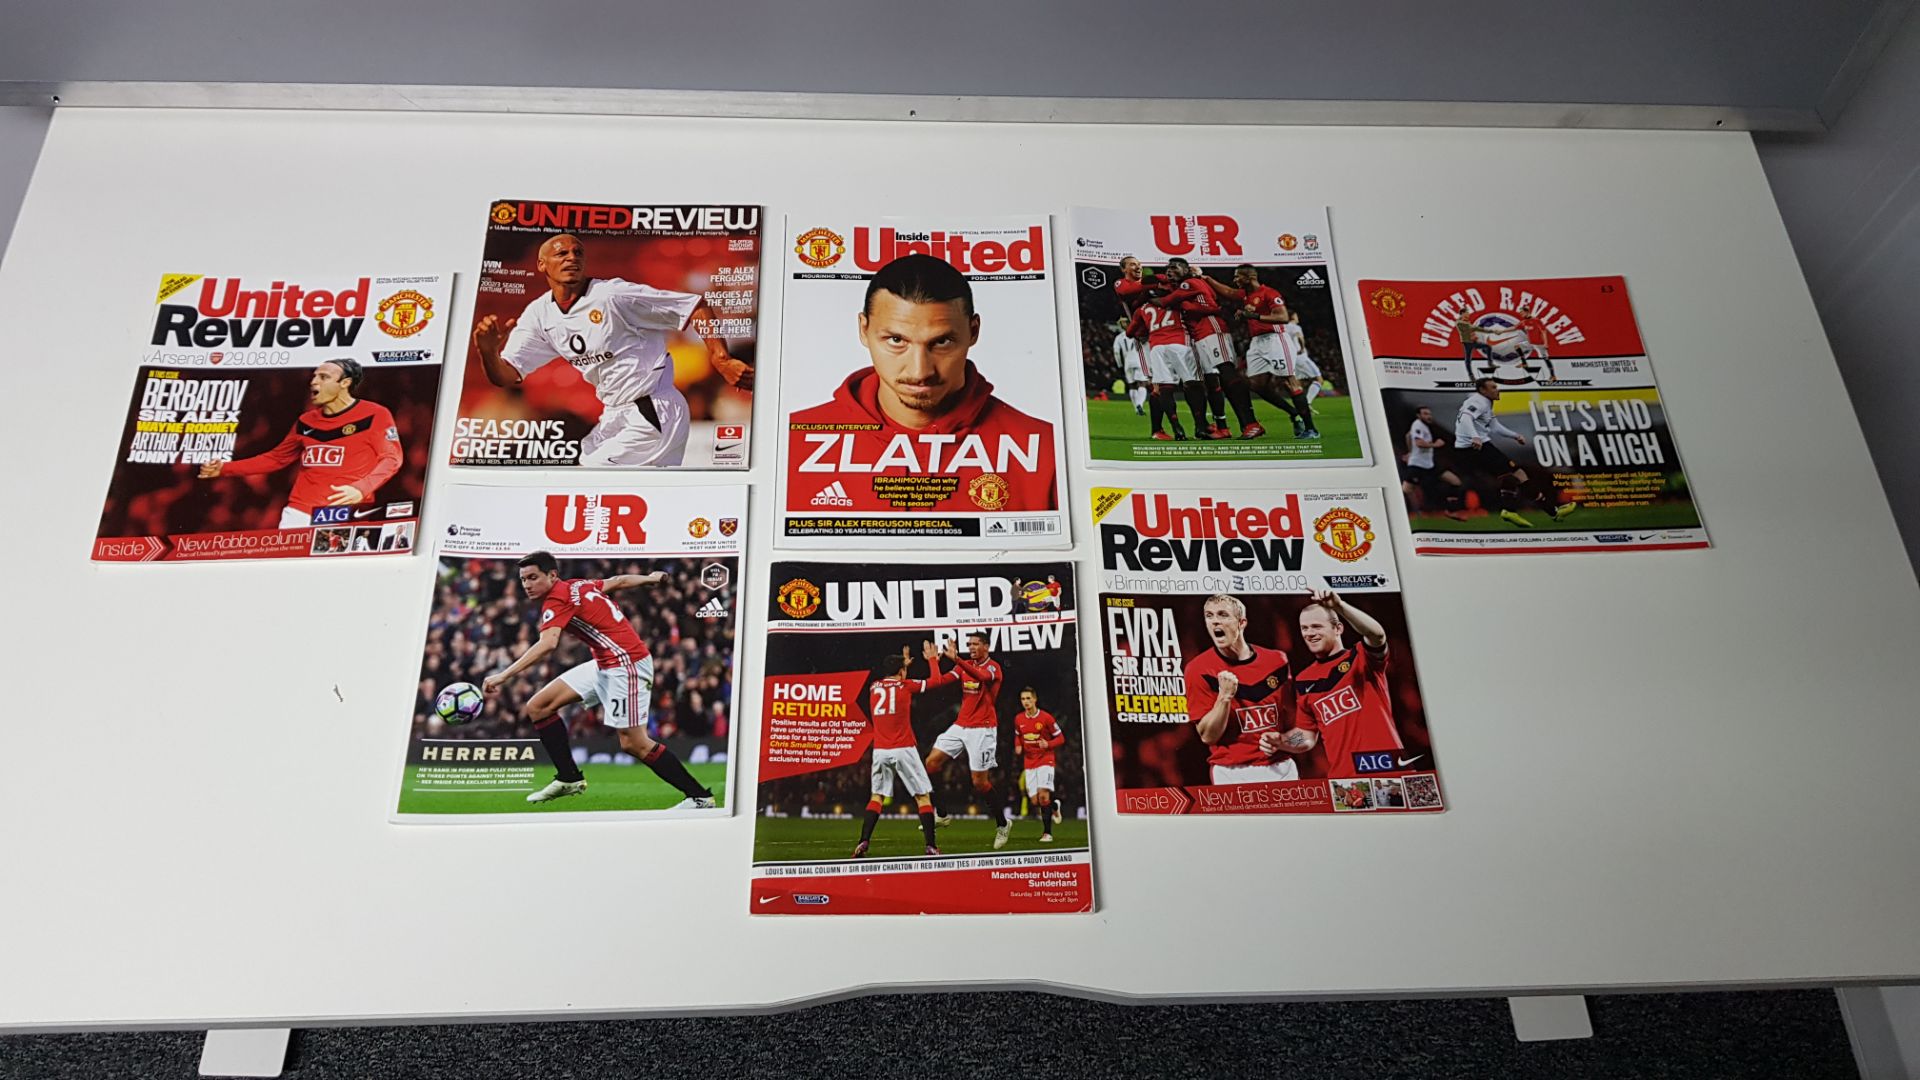 1 X MANCHESTER UNITED DEC 2016 OFFICIAL MONTHLY MAGAZINE & 7 X MANCHESTER UNITED PROGRAMMES - Image 2 of 2